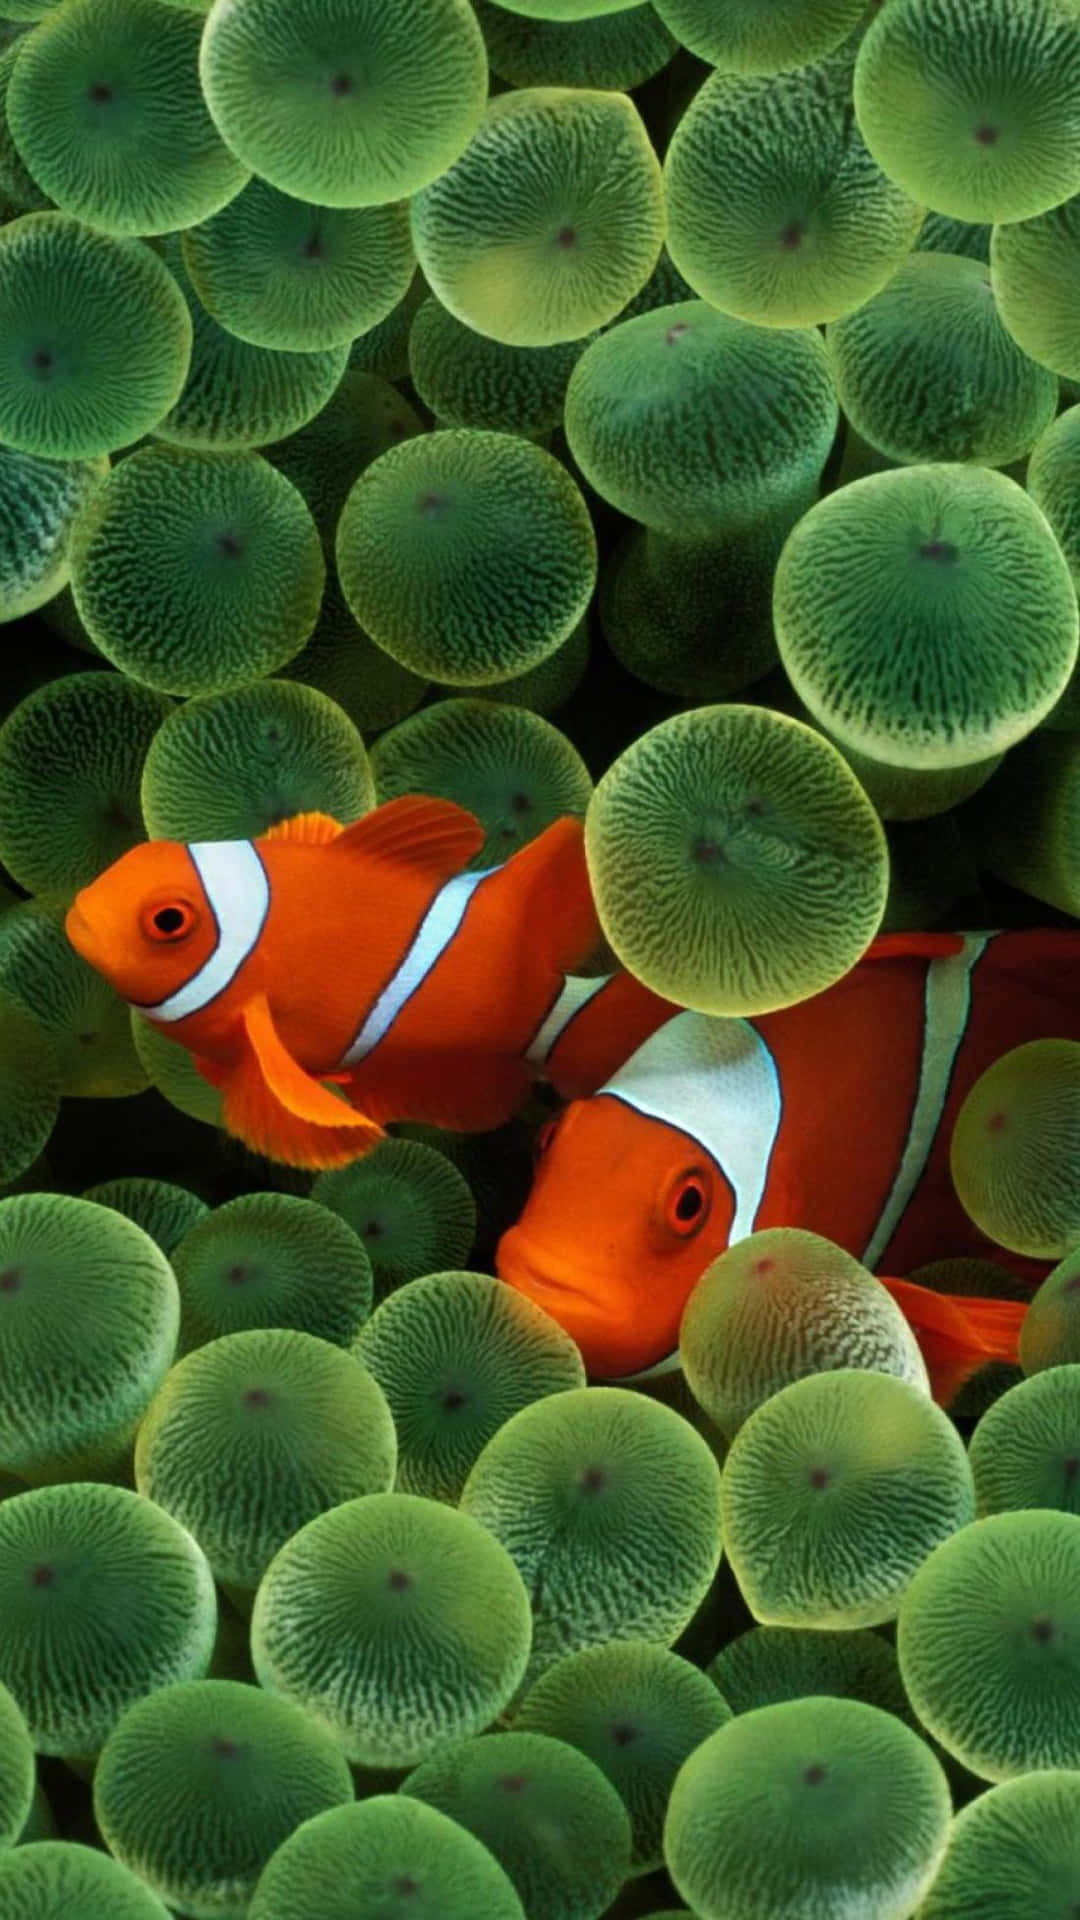 two fishes kissing each other